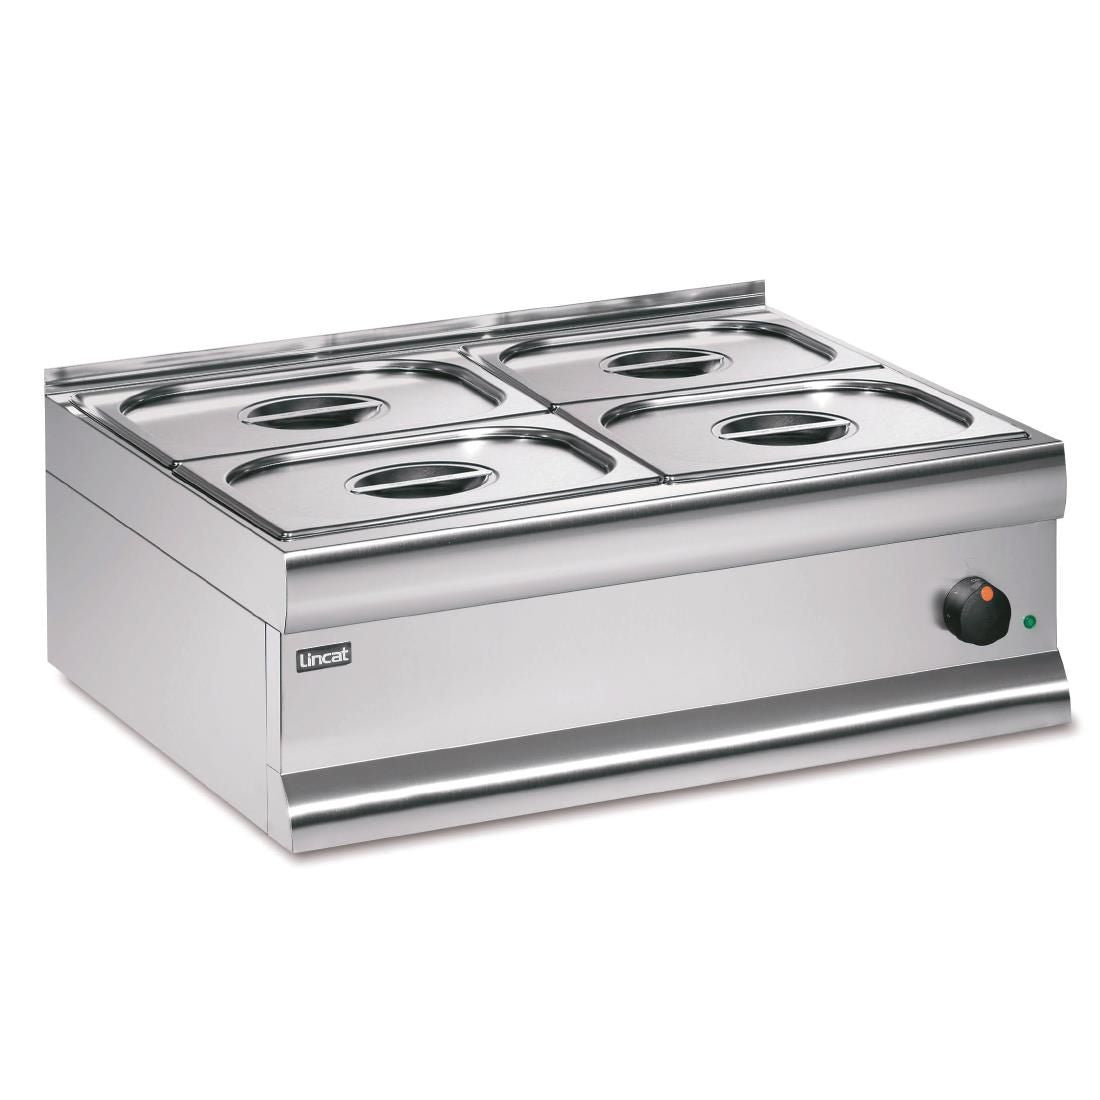 BM7XB - Lincat Silverlink 600 Electric Counter-top Bain Marie - Dry Heat - Gastronorms - Base + Dish Pack - W 750 mm - 1.0 kW JD Catering Equipment Solutions Ltd